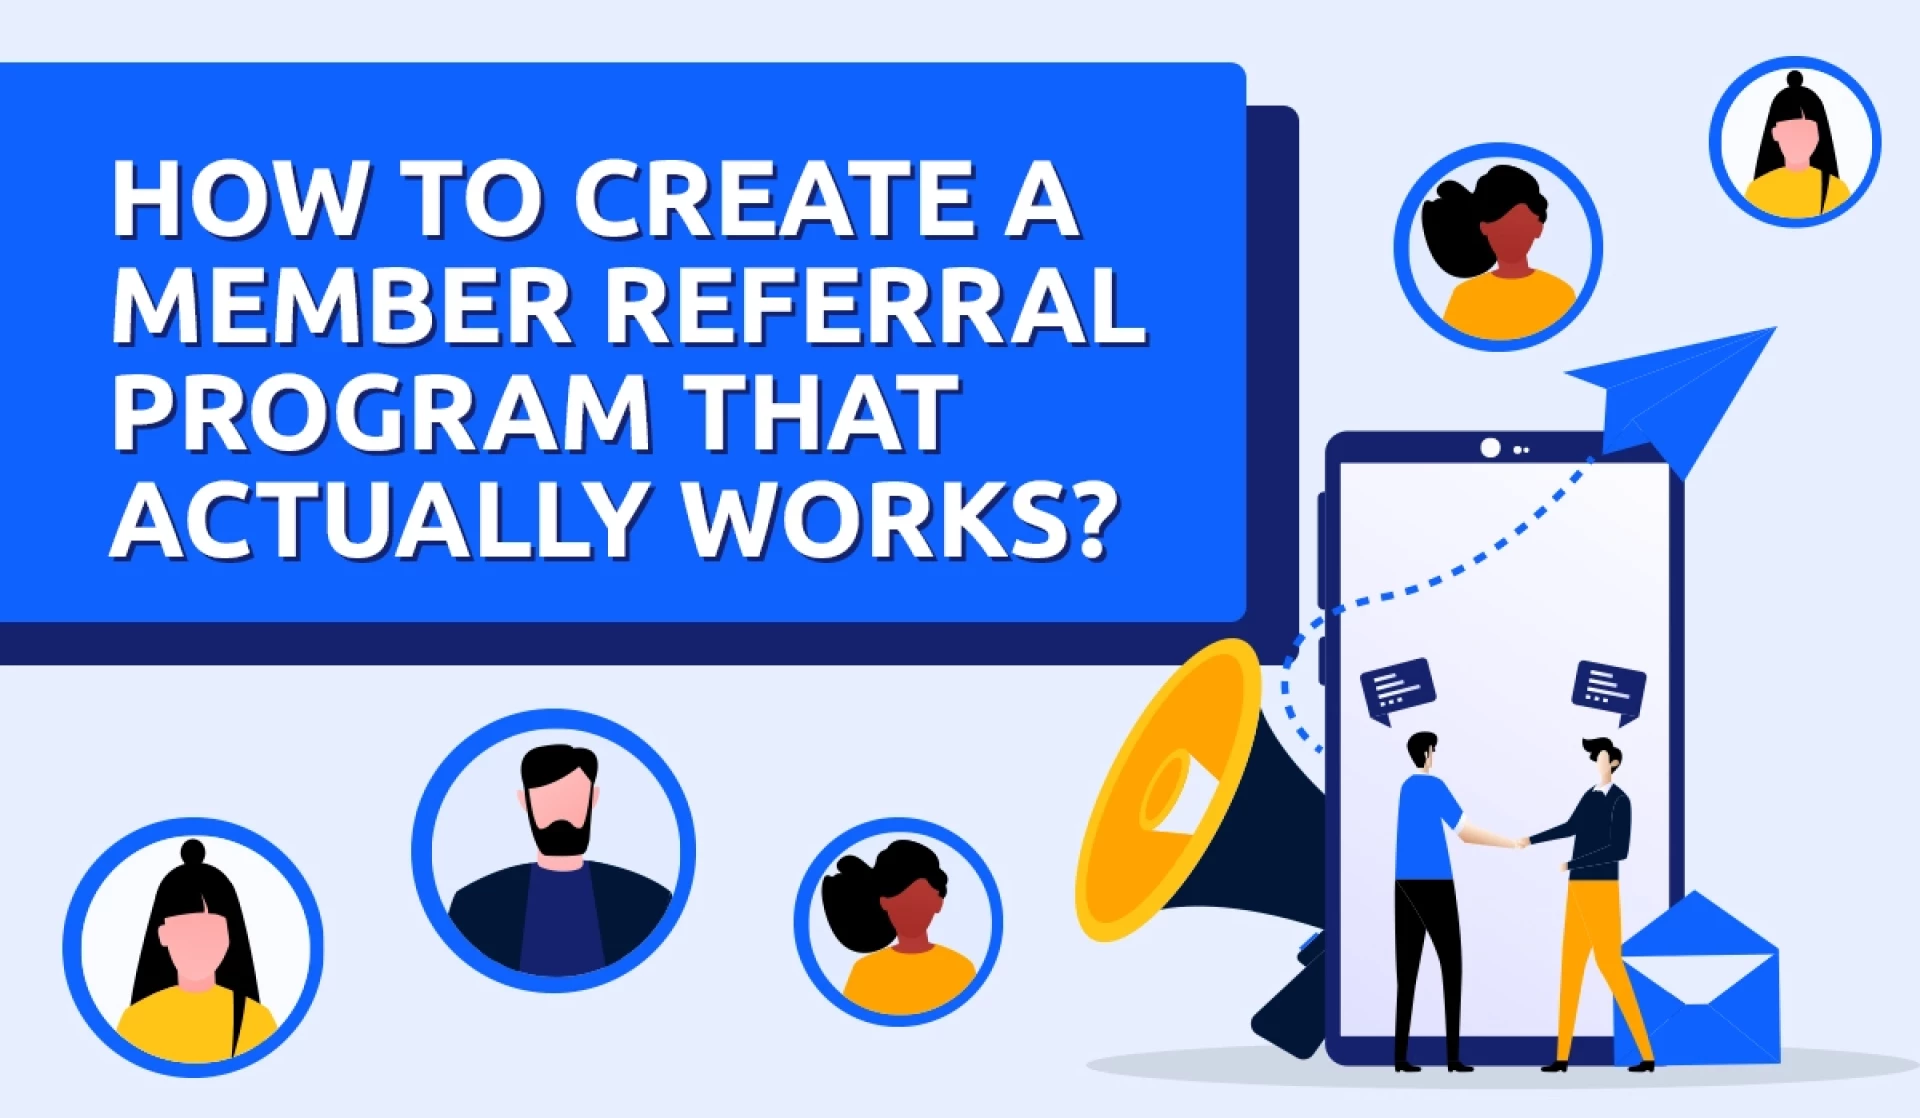 How to Design a Winning Member Referral Program that Drives Membership Growth?